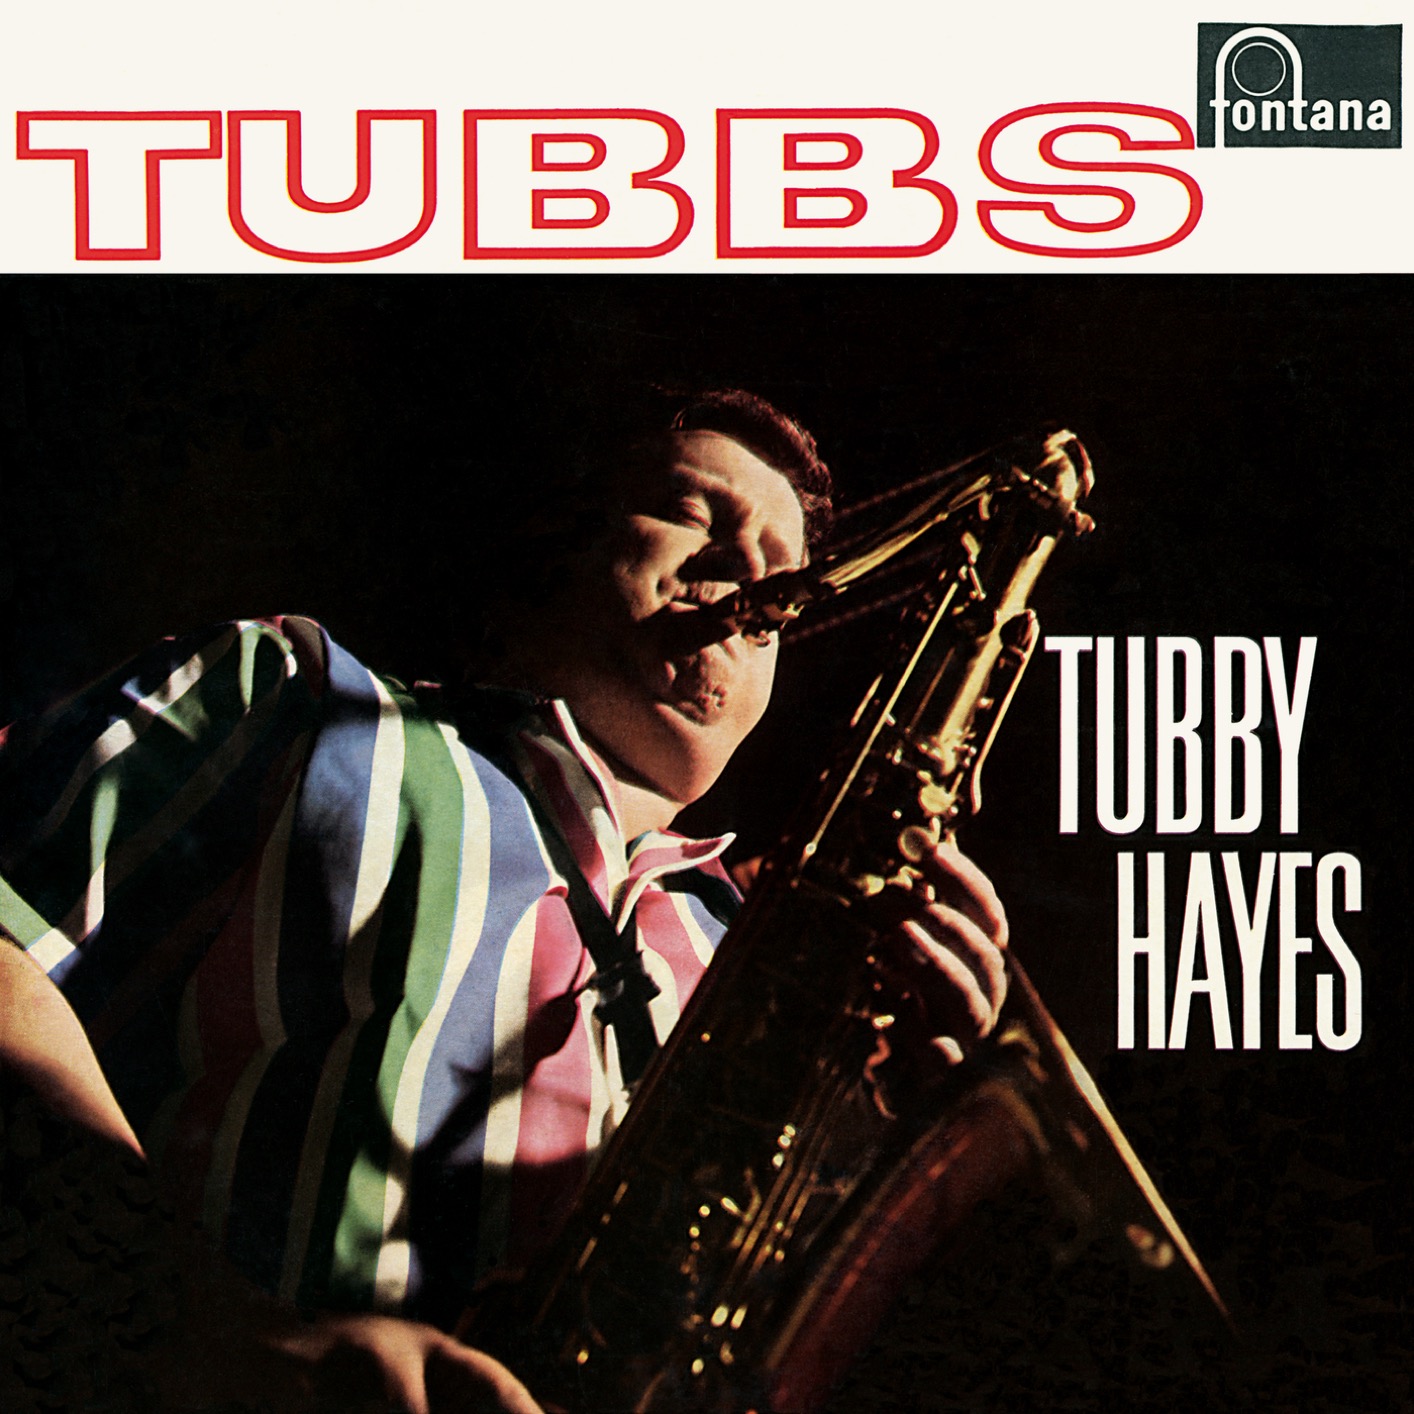 Tubby Hayes – Tubbs (Remastered) (1961/2019) [FLAC 24bit/88,2kHz]